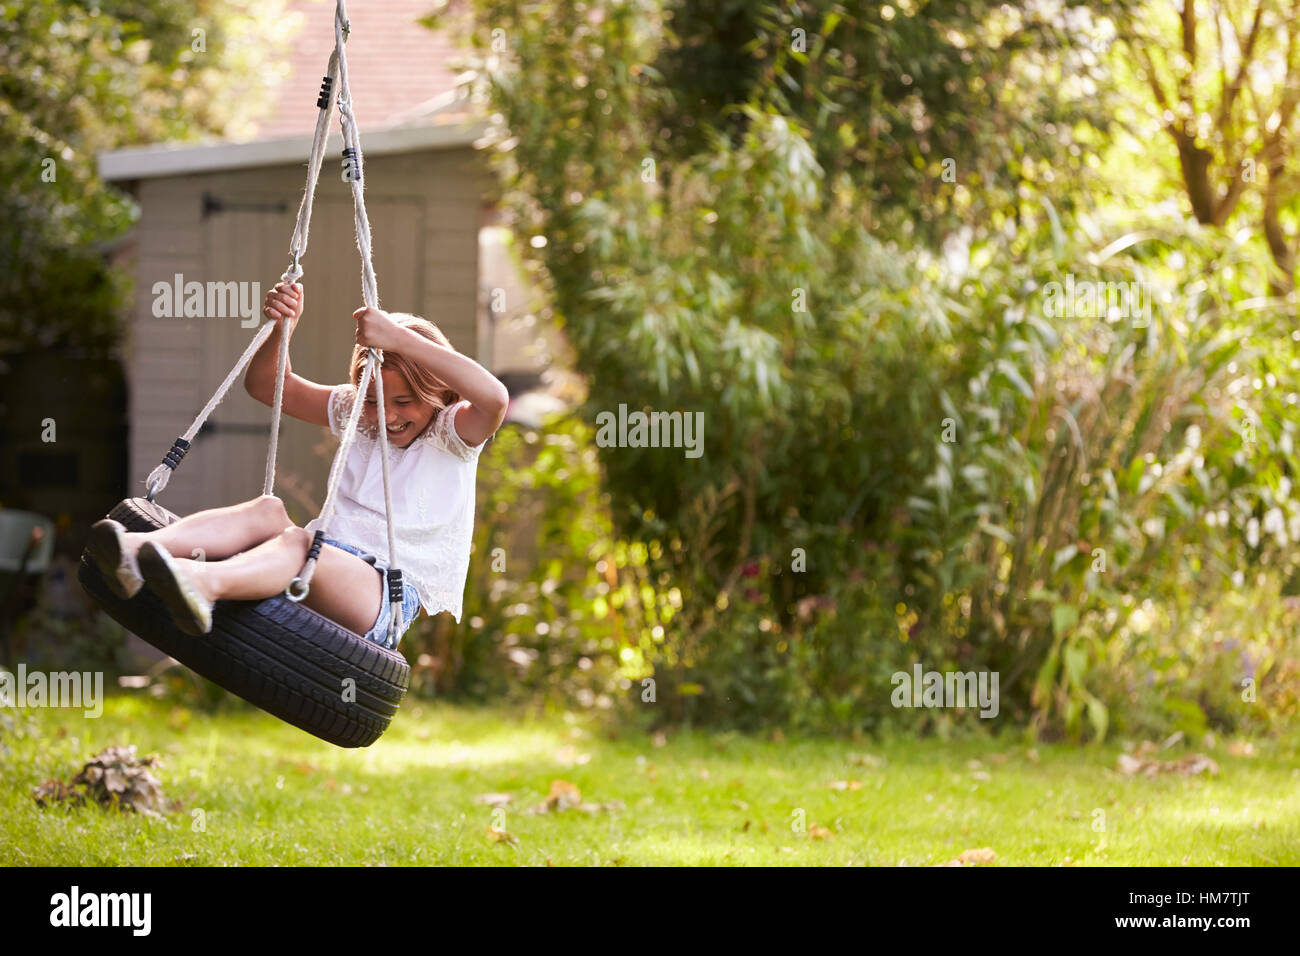 Young Girl Playing On Tire Swing In Garden Stock Photo